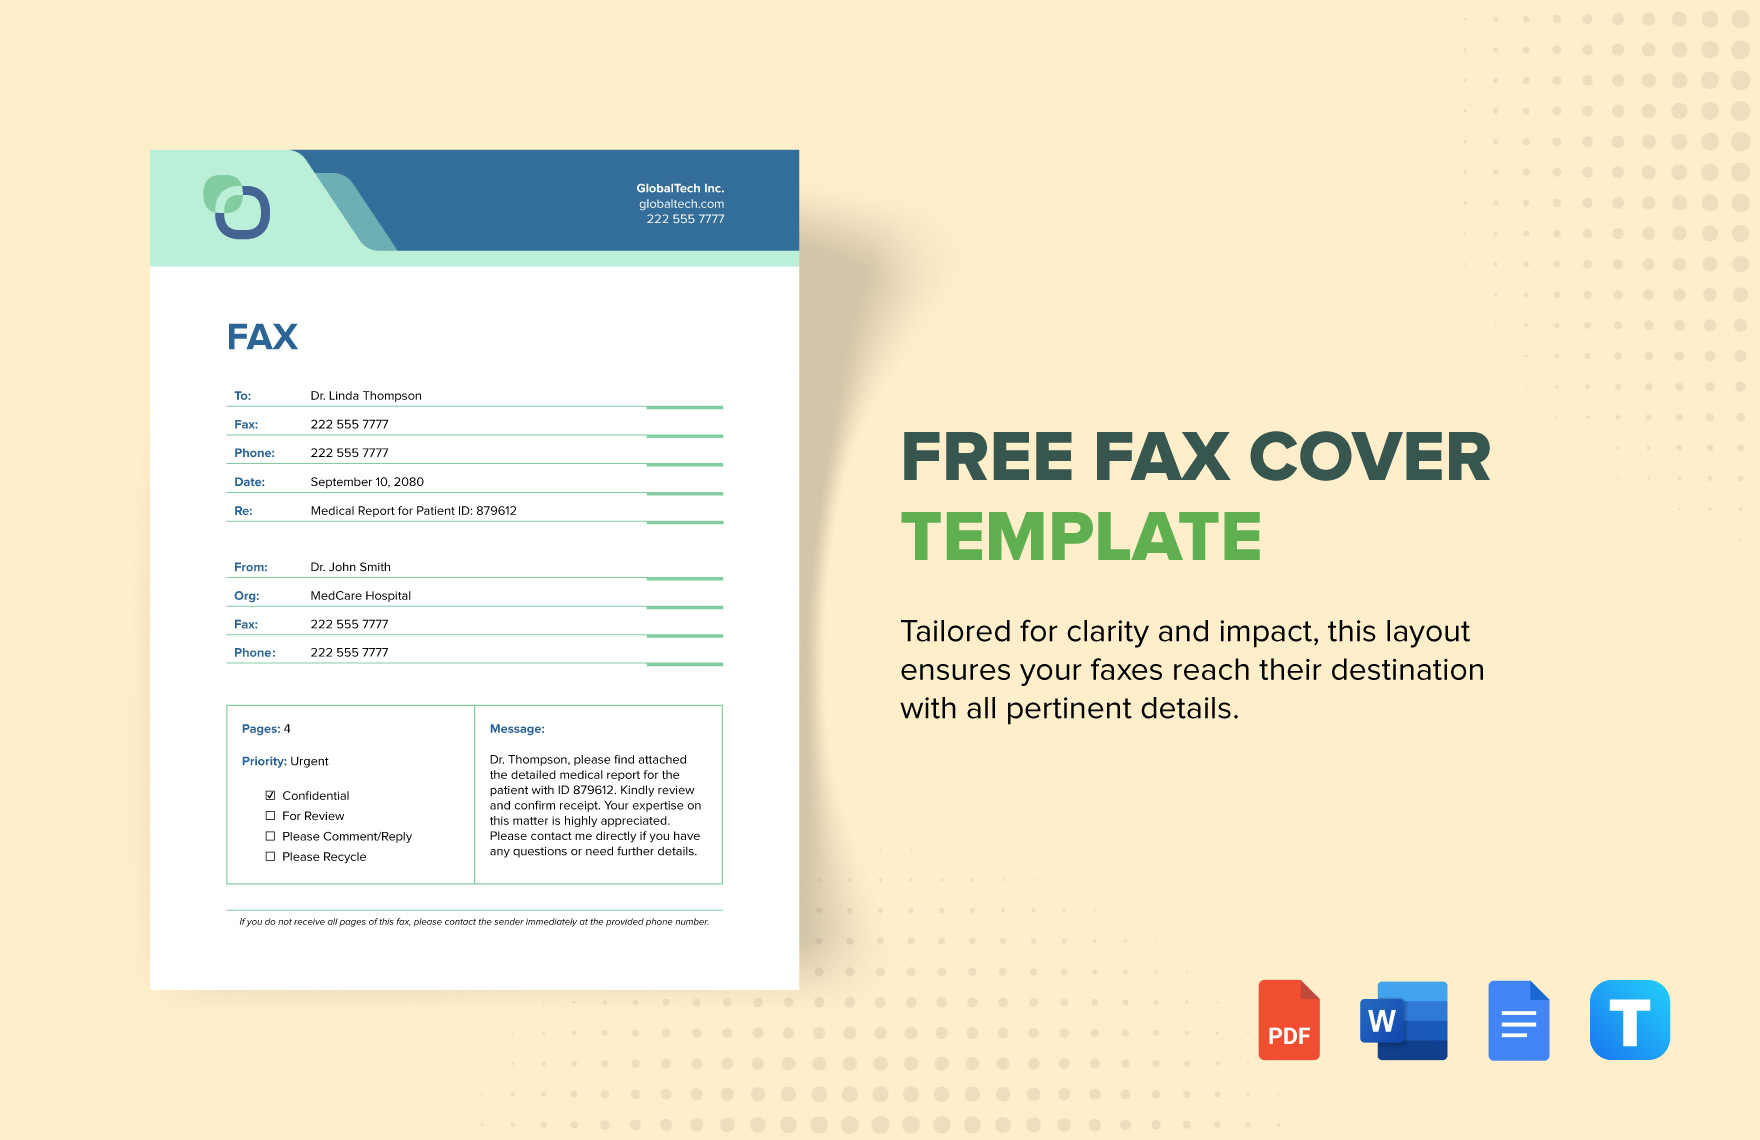 fax-cover-template